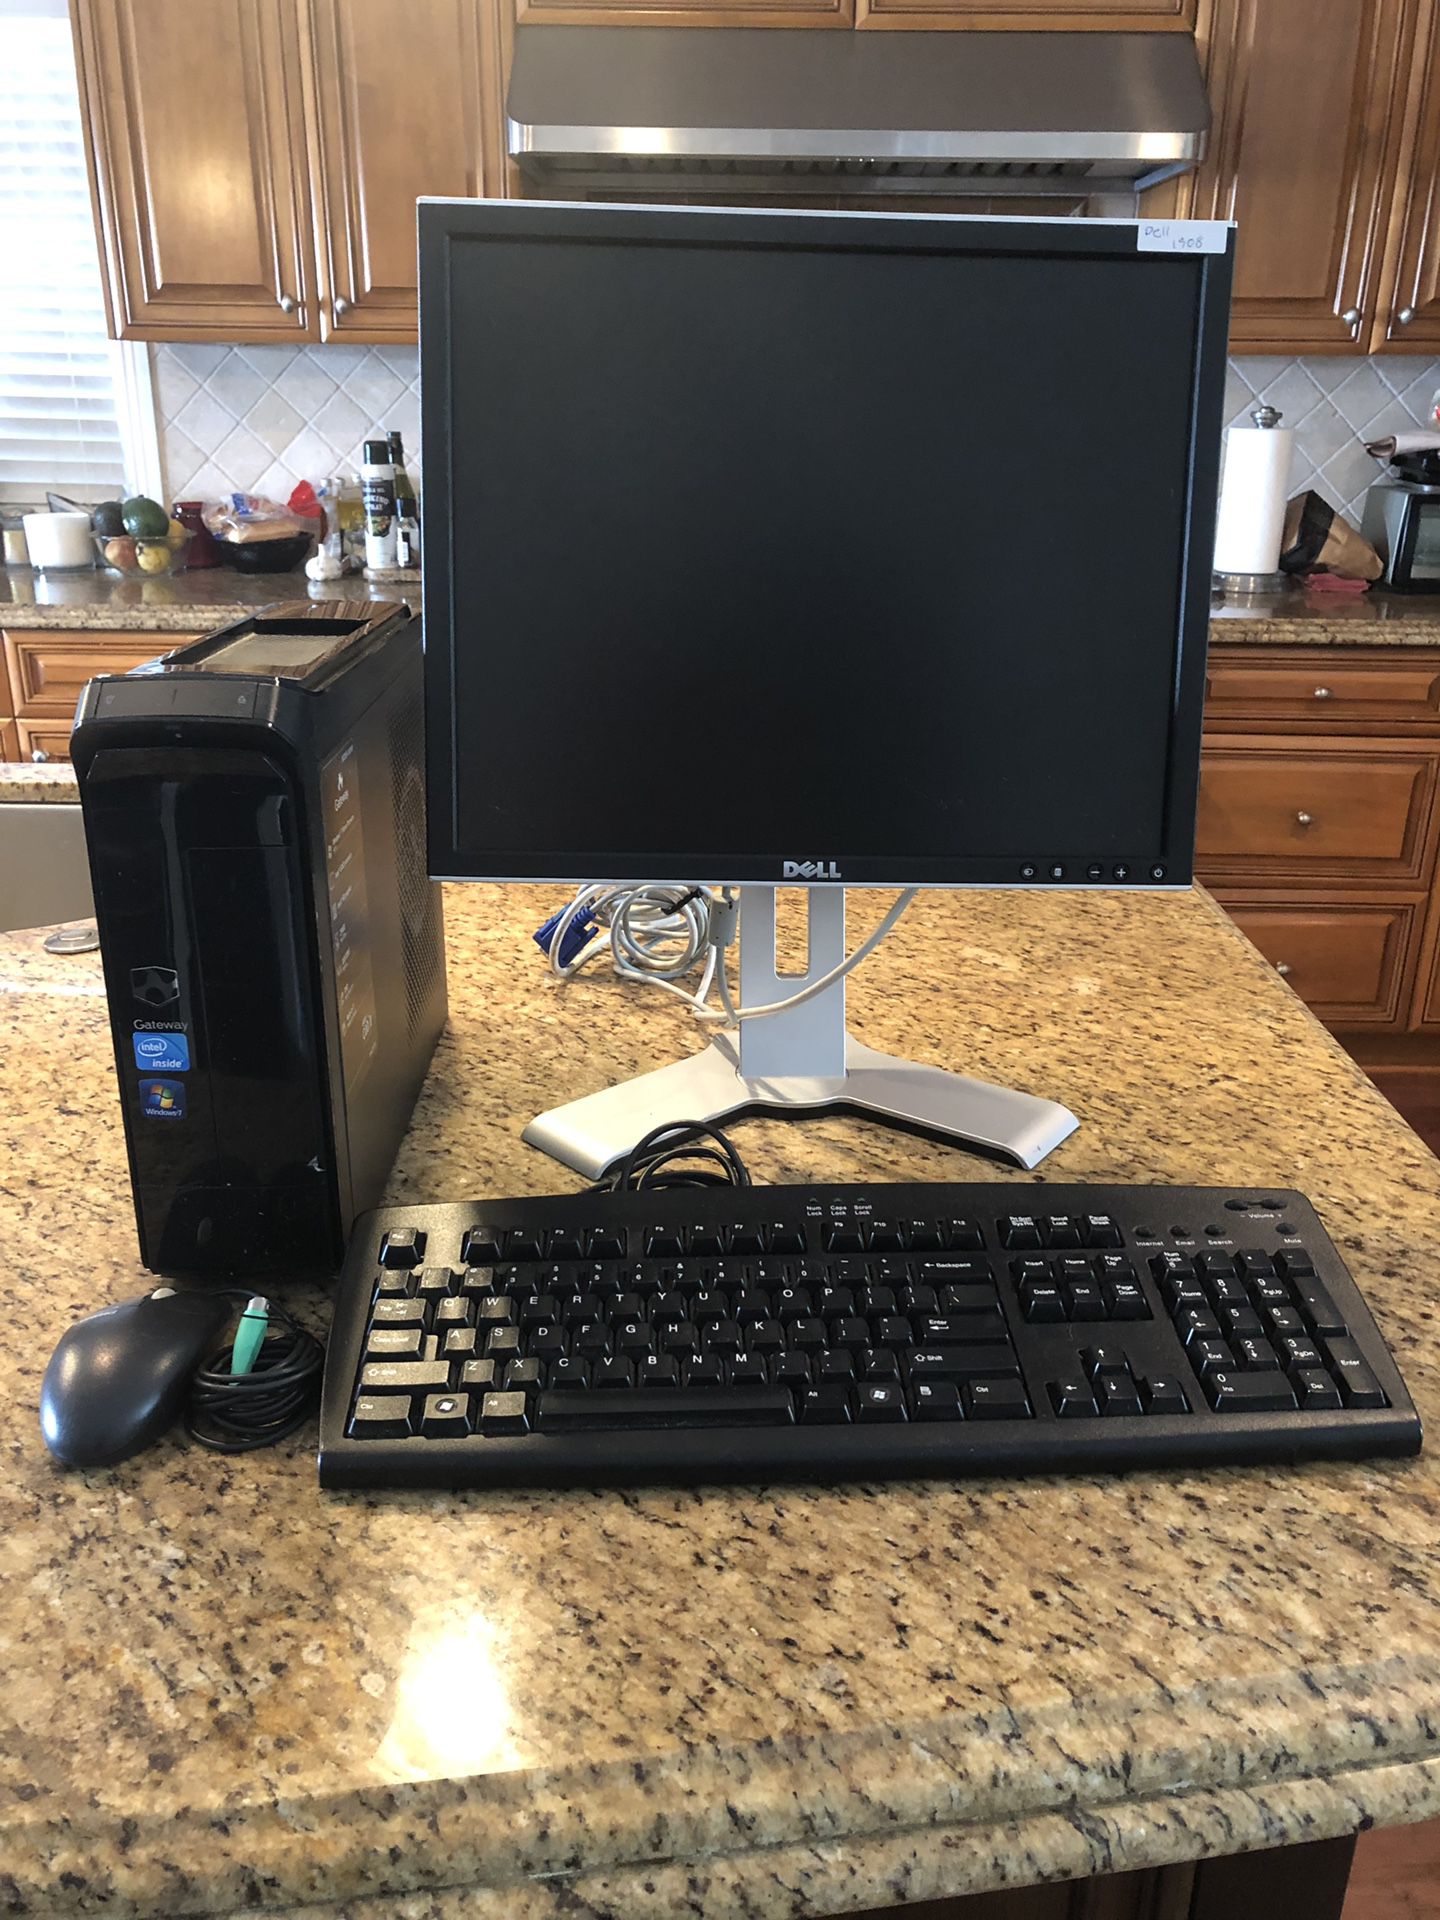 Gateway desktop computer with Dell monitor keyboard and mouse